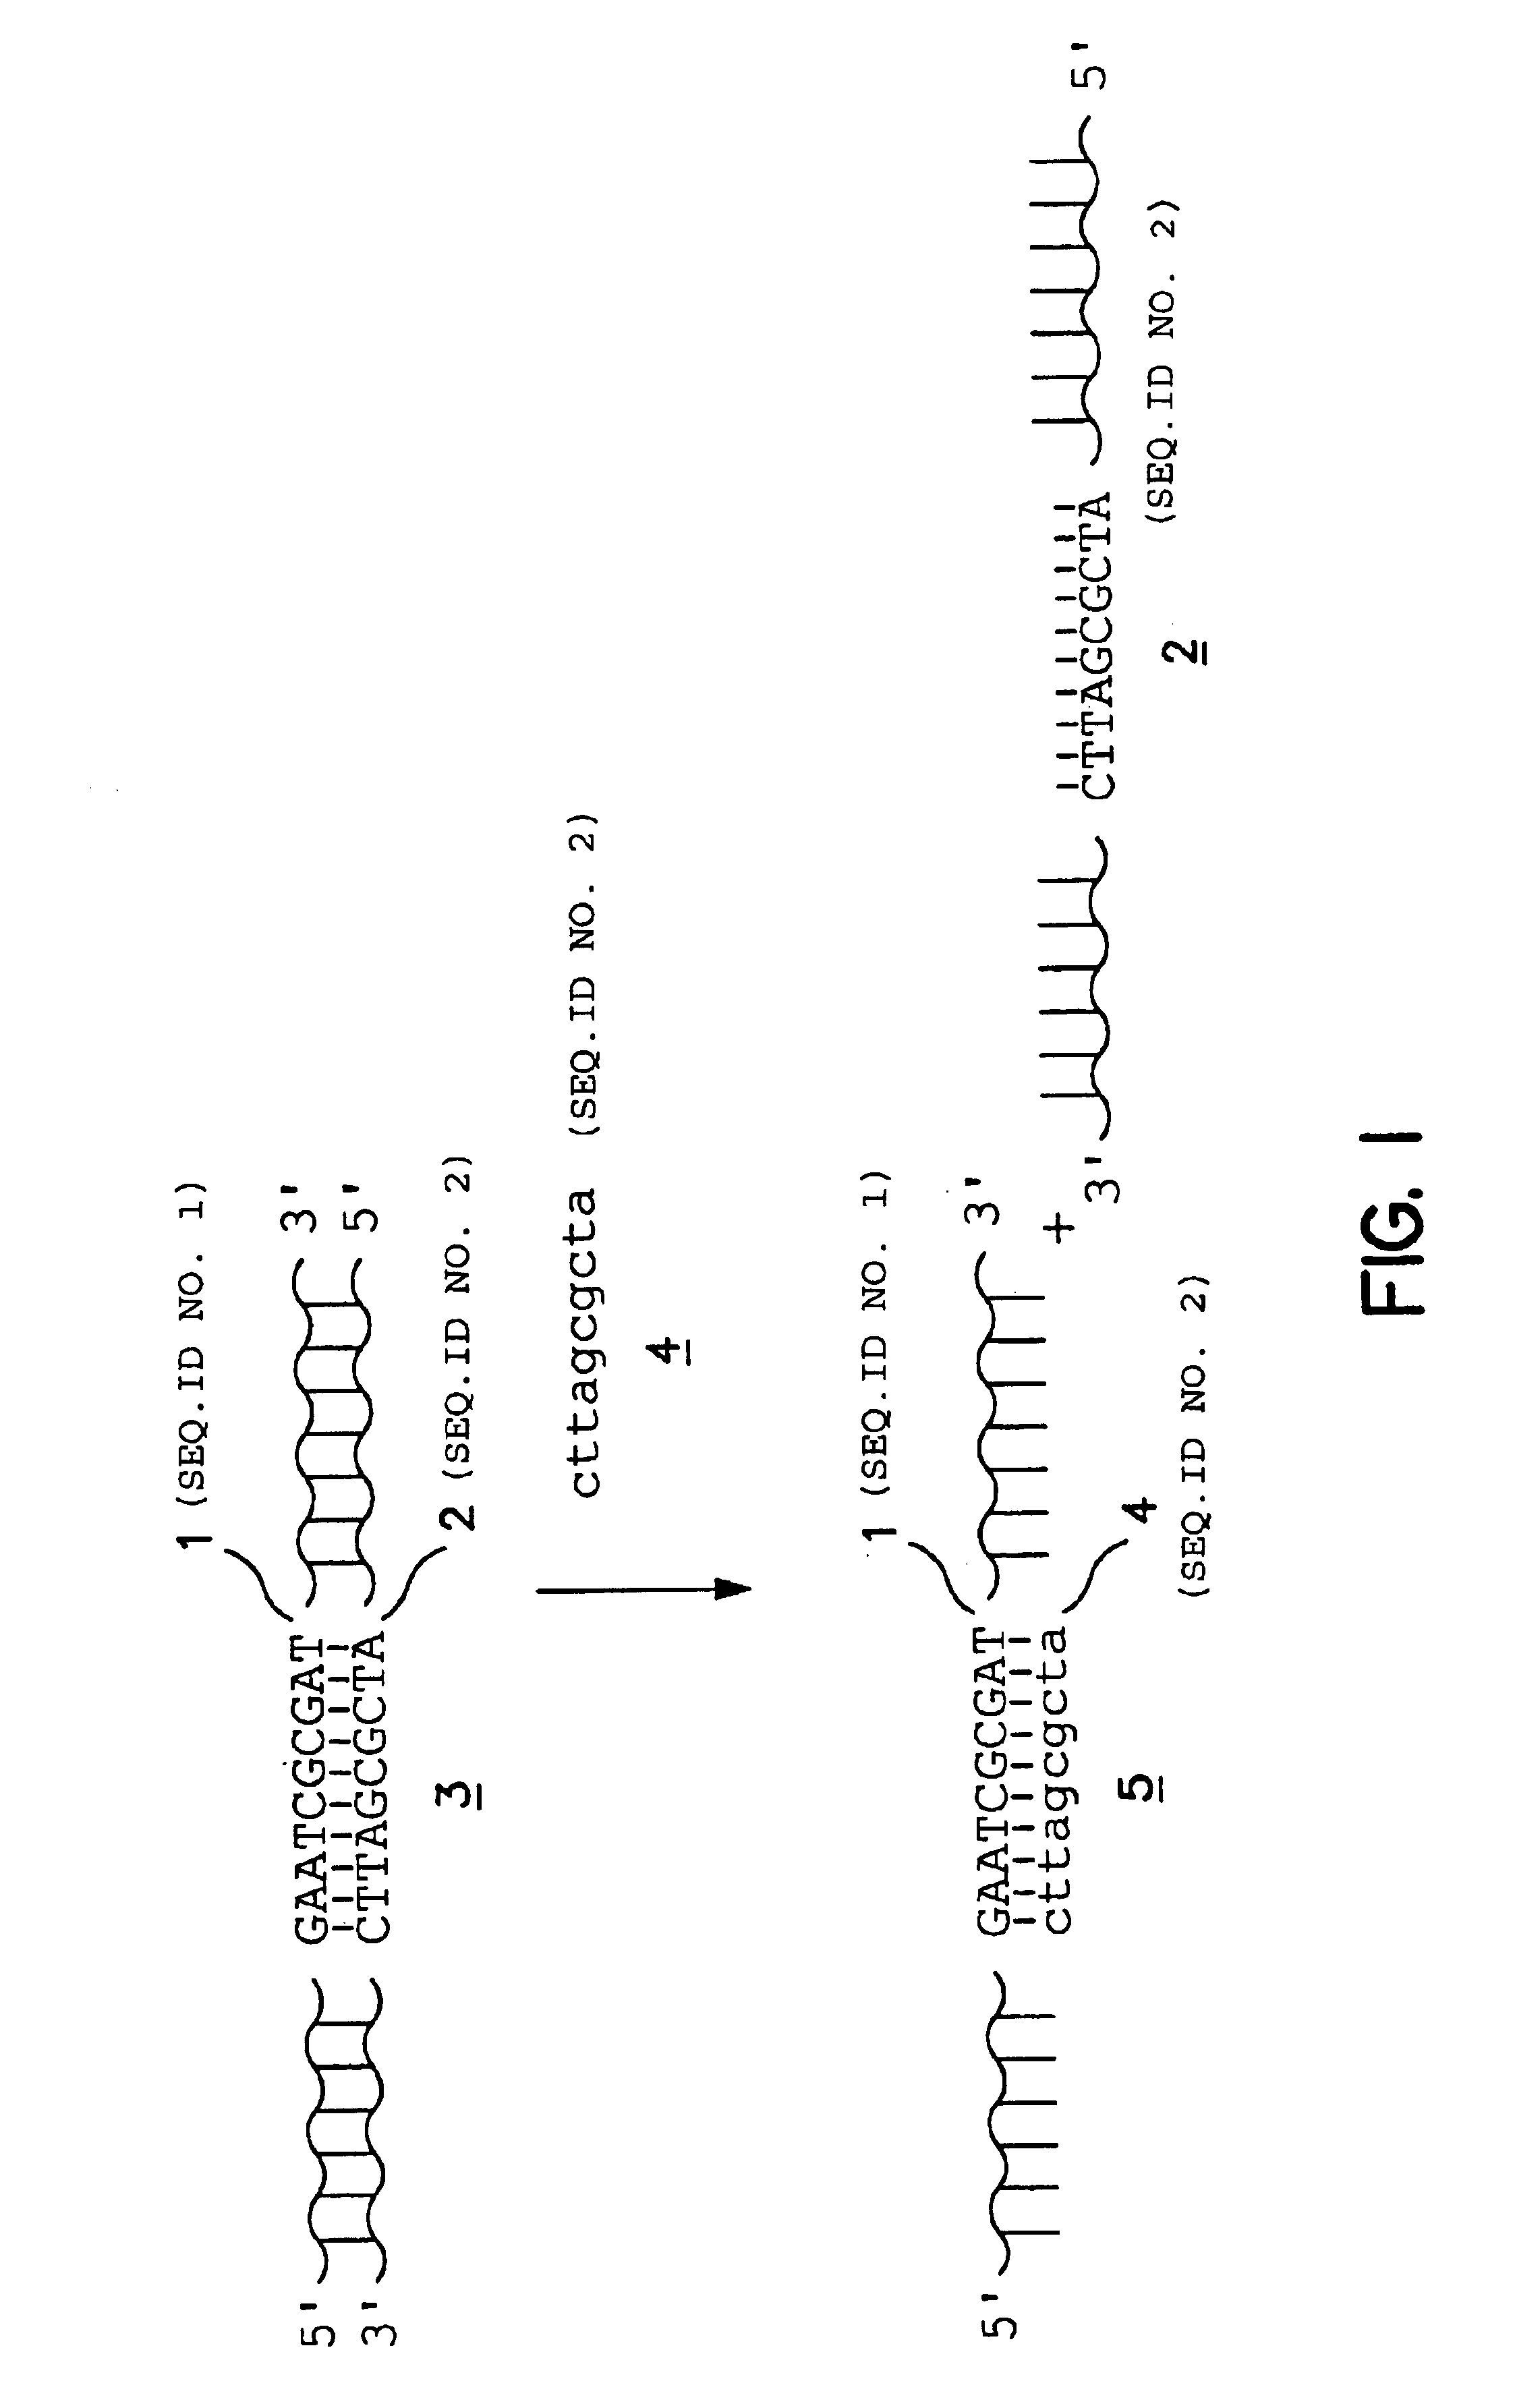 Strand displacement methods employing competitor oligonucleotides for isolating one strand of a double-stranded nucleic acid